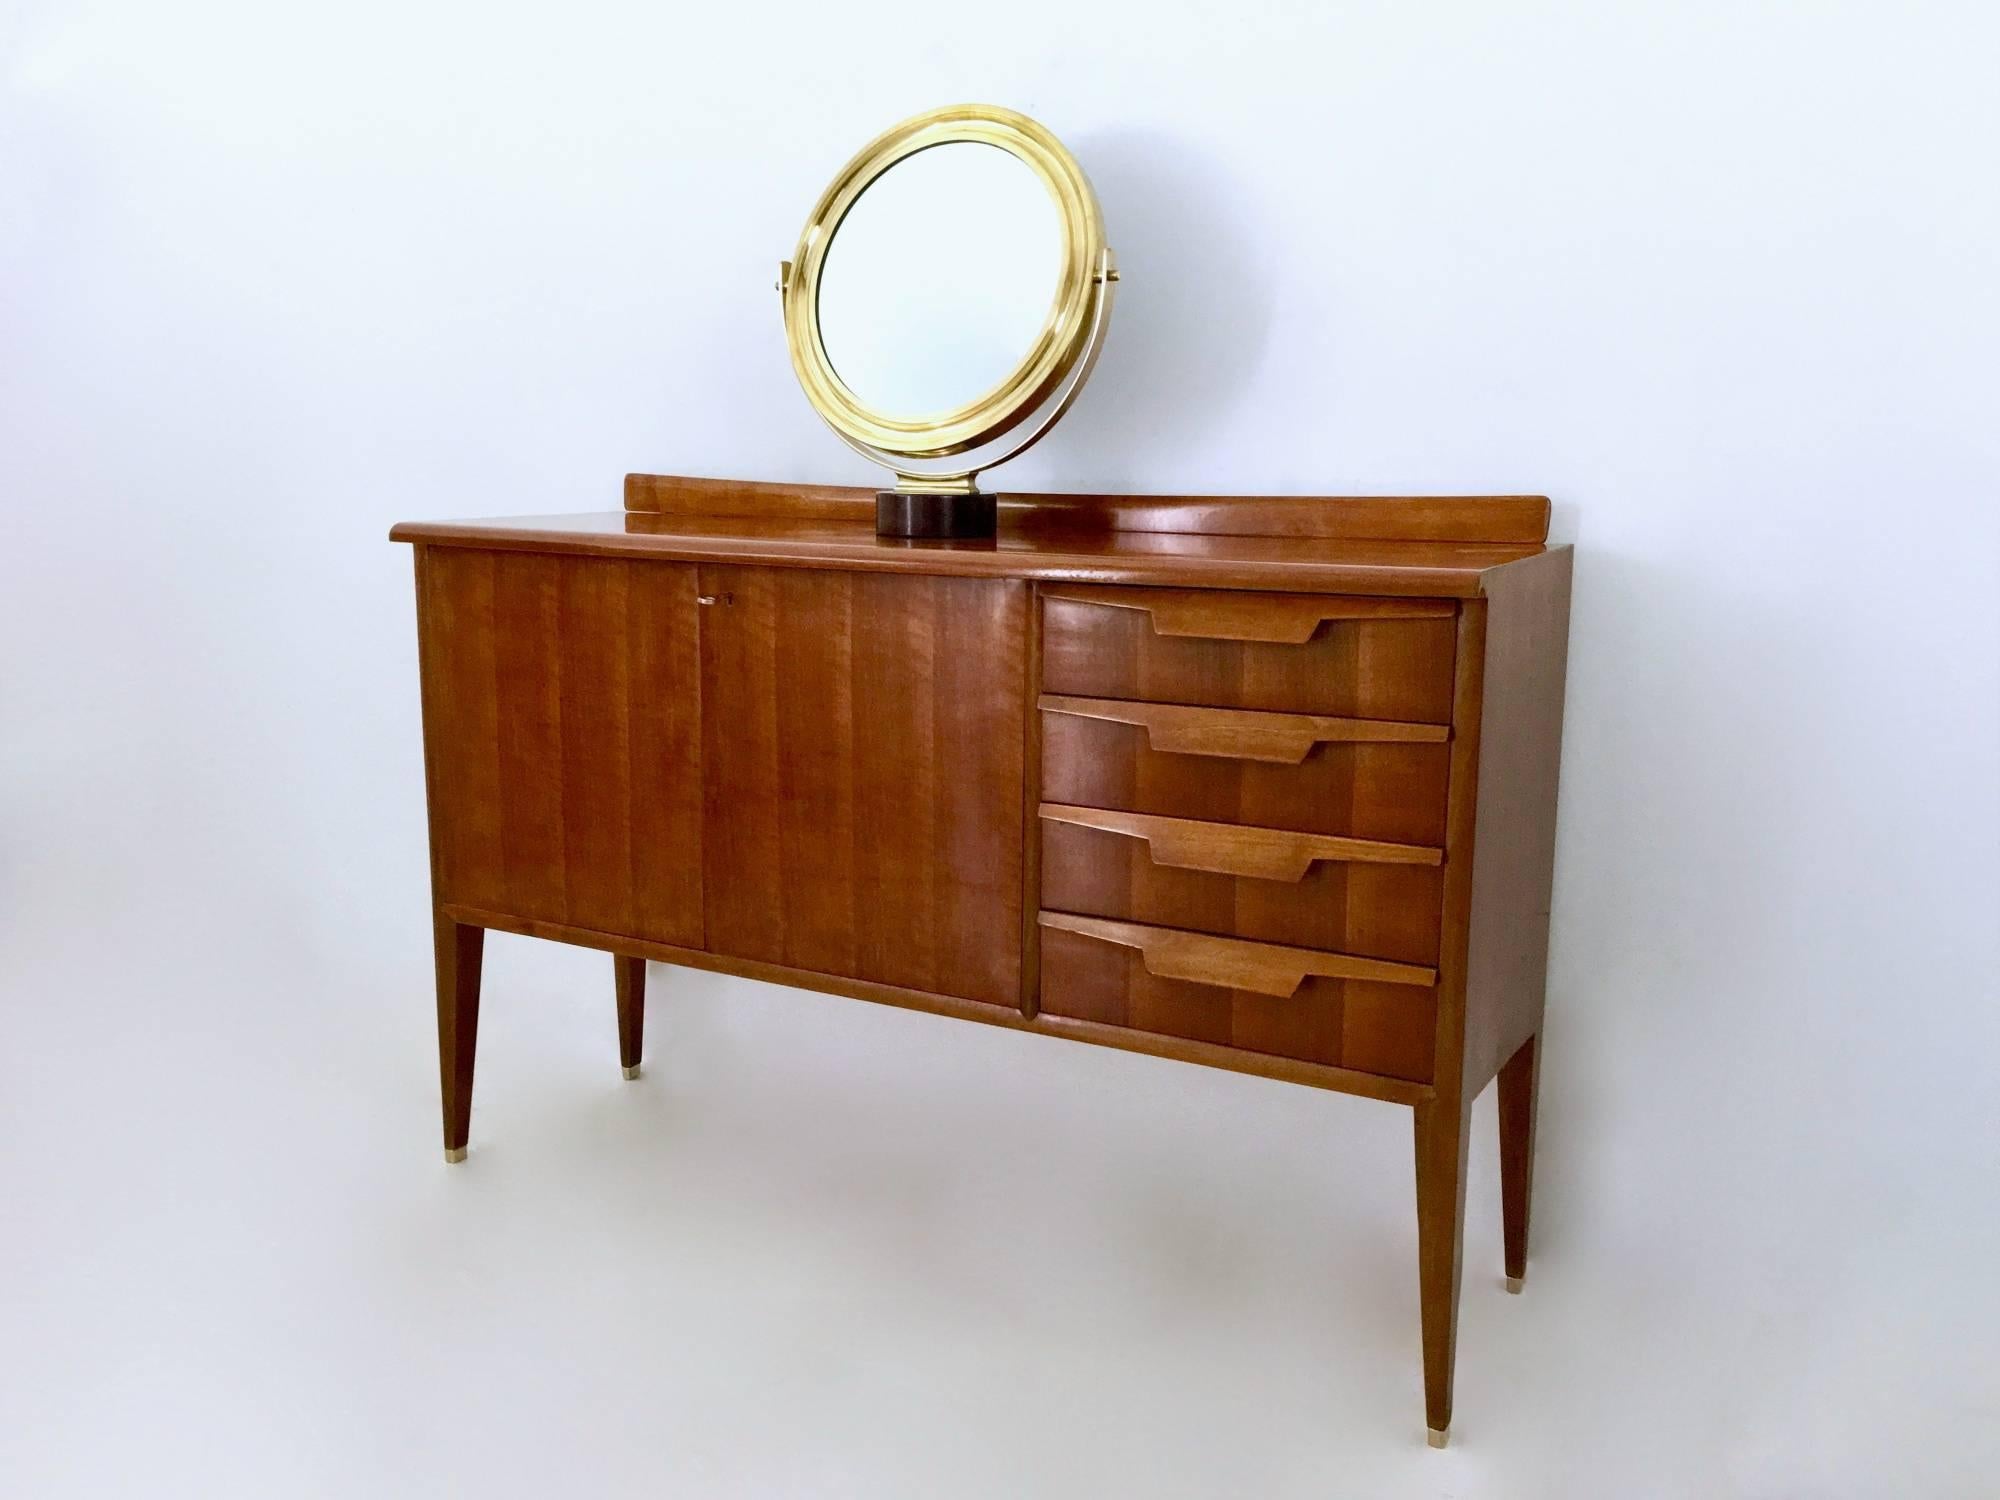 Italian Walnut Sideboard in the Style of Gio Ponti with Maple Interiors, Italy, 1950s